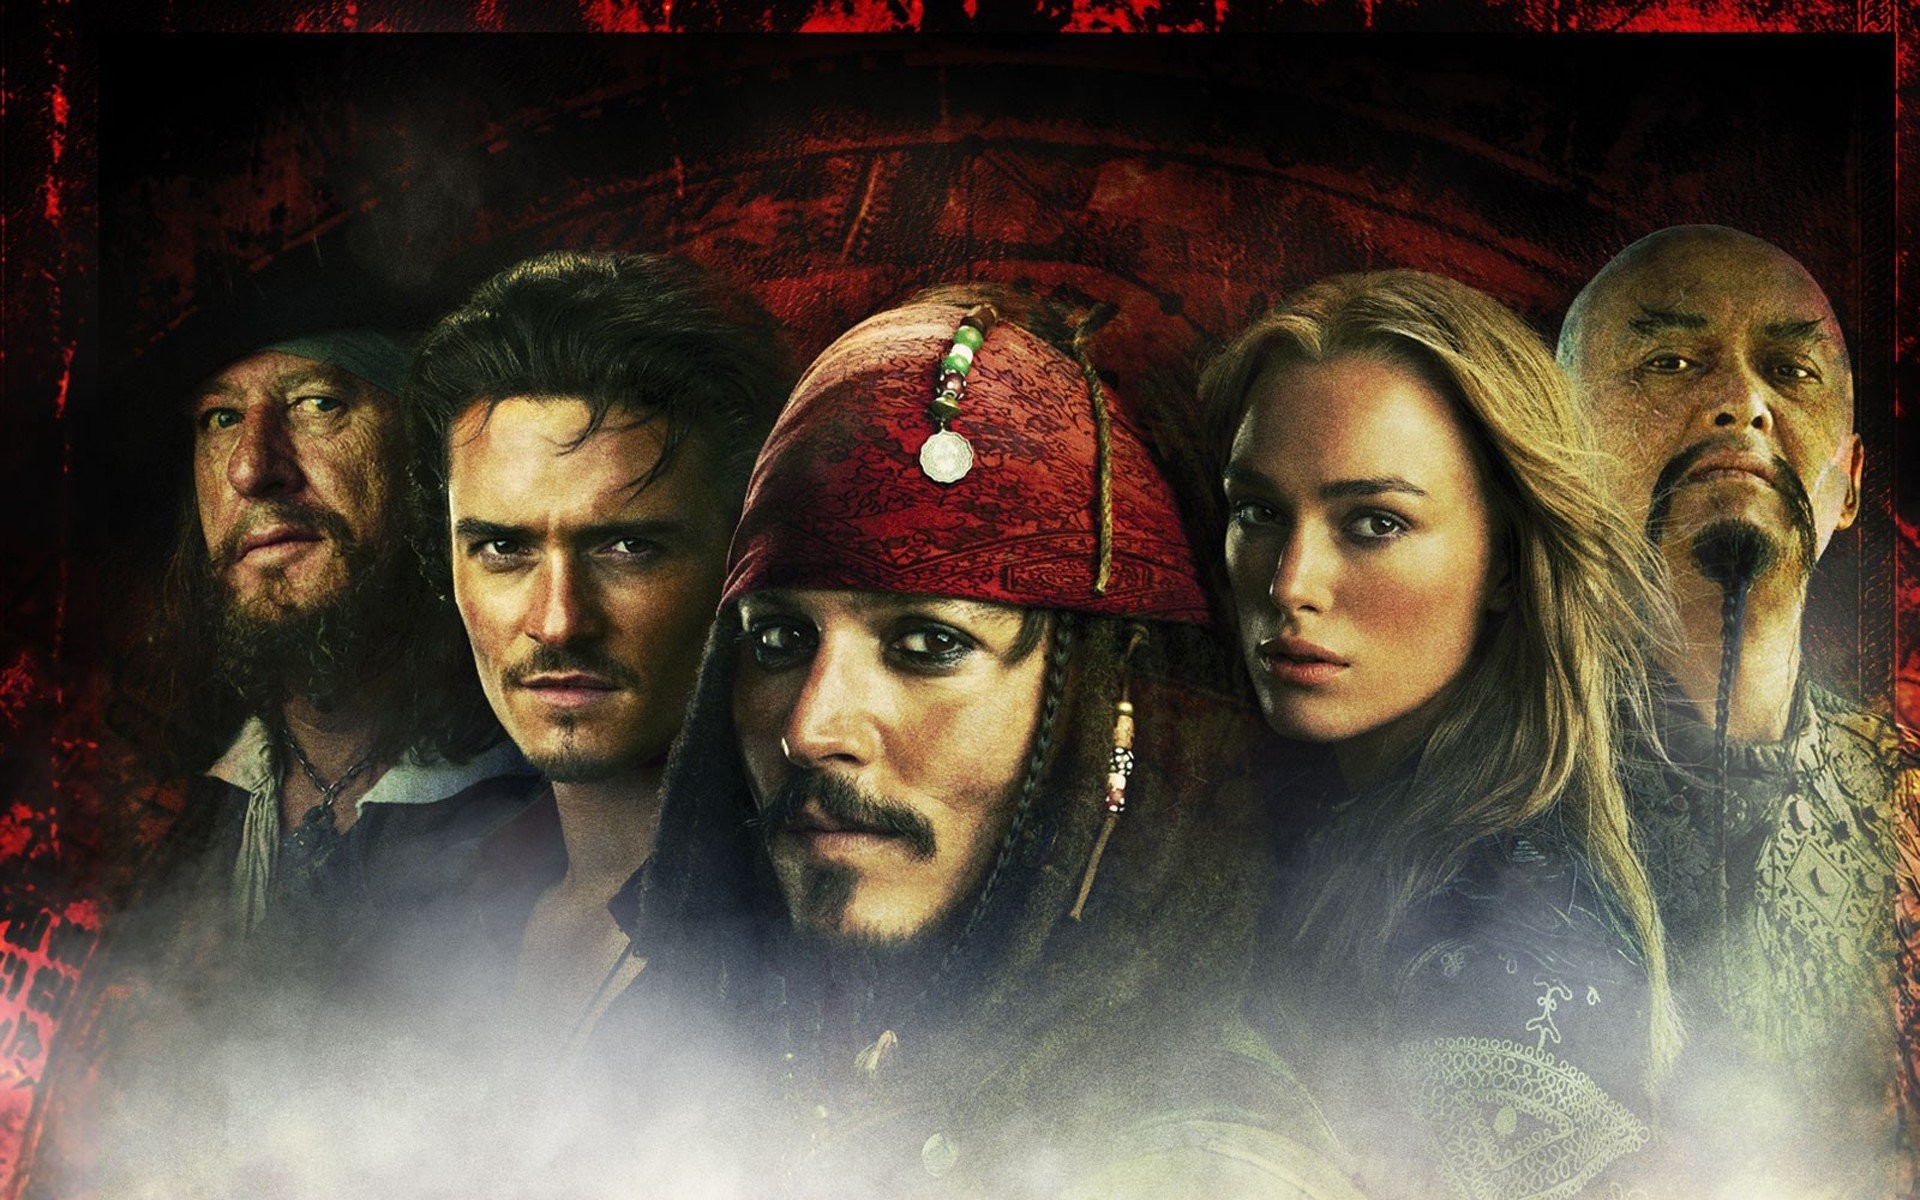 1920x1200 pirates of the caribbean 5 johnny depp orlando bloom Pirates of the  Caribbean 5: Orlando Bloom Confirms Discussions About His Return | storyy!